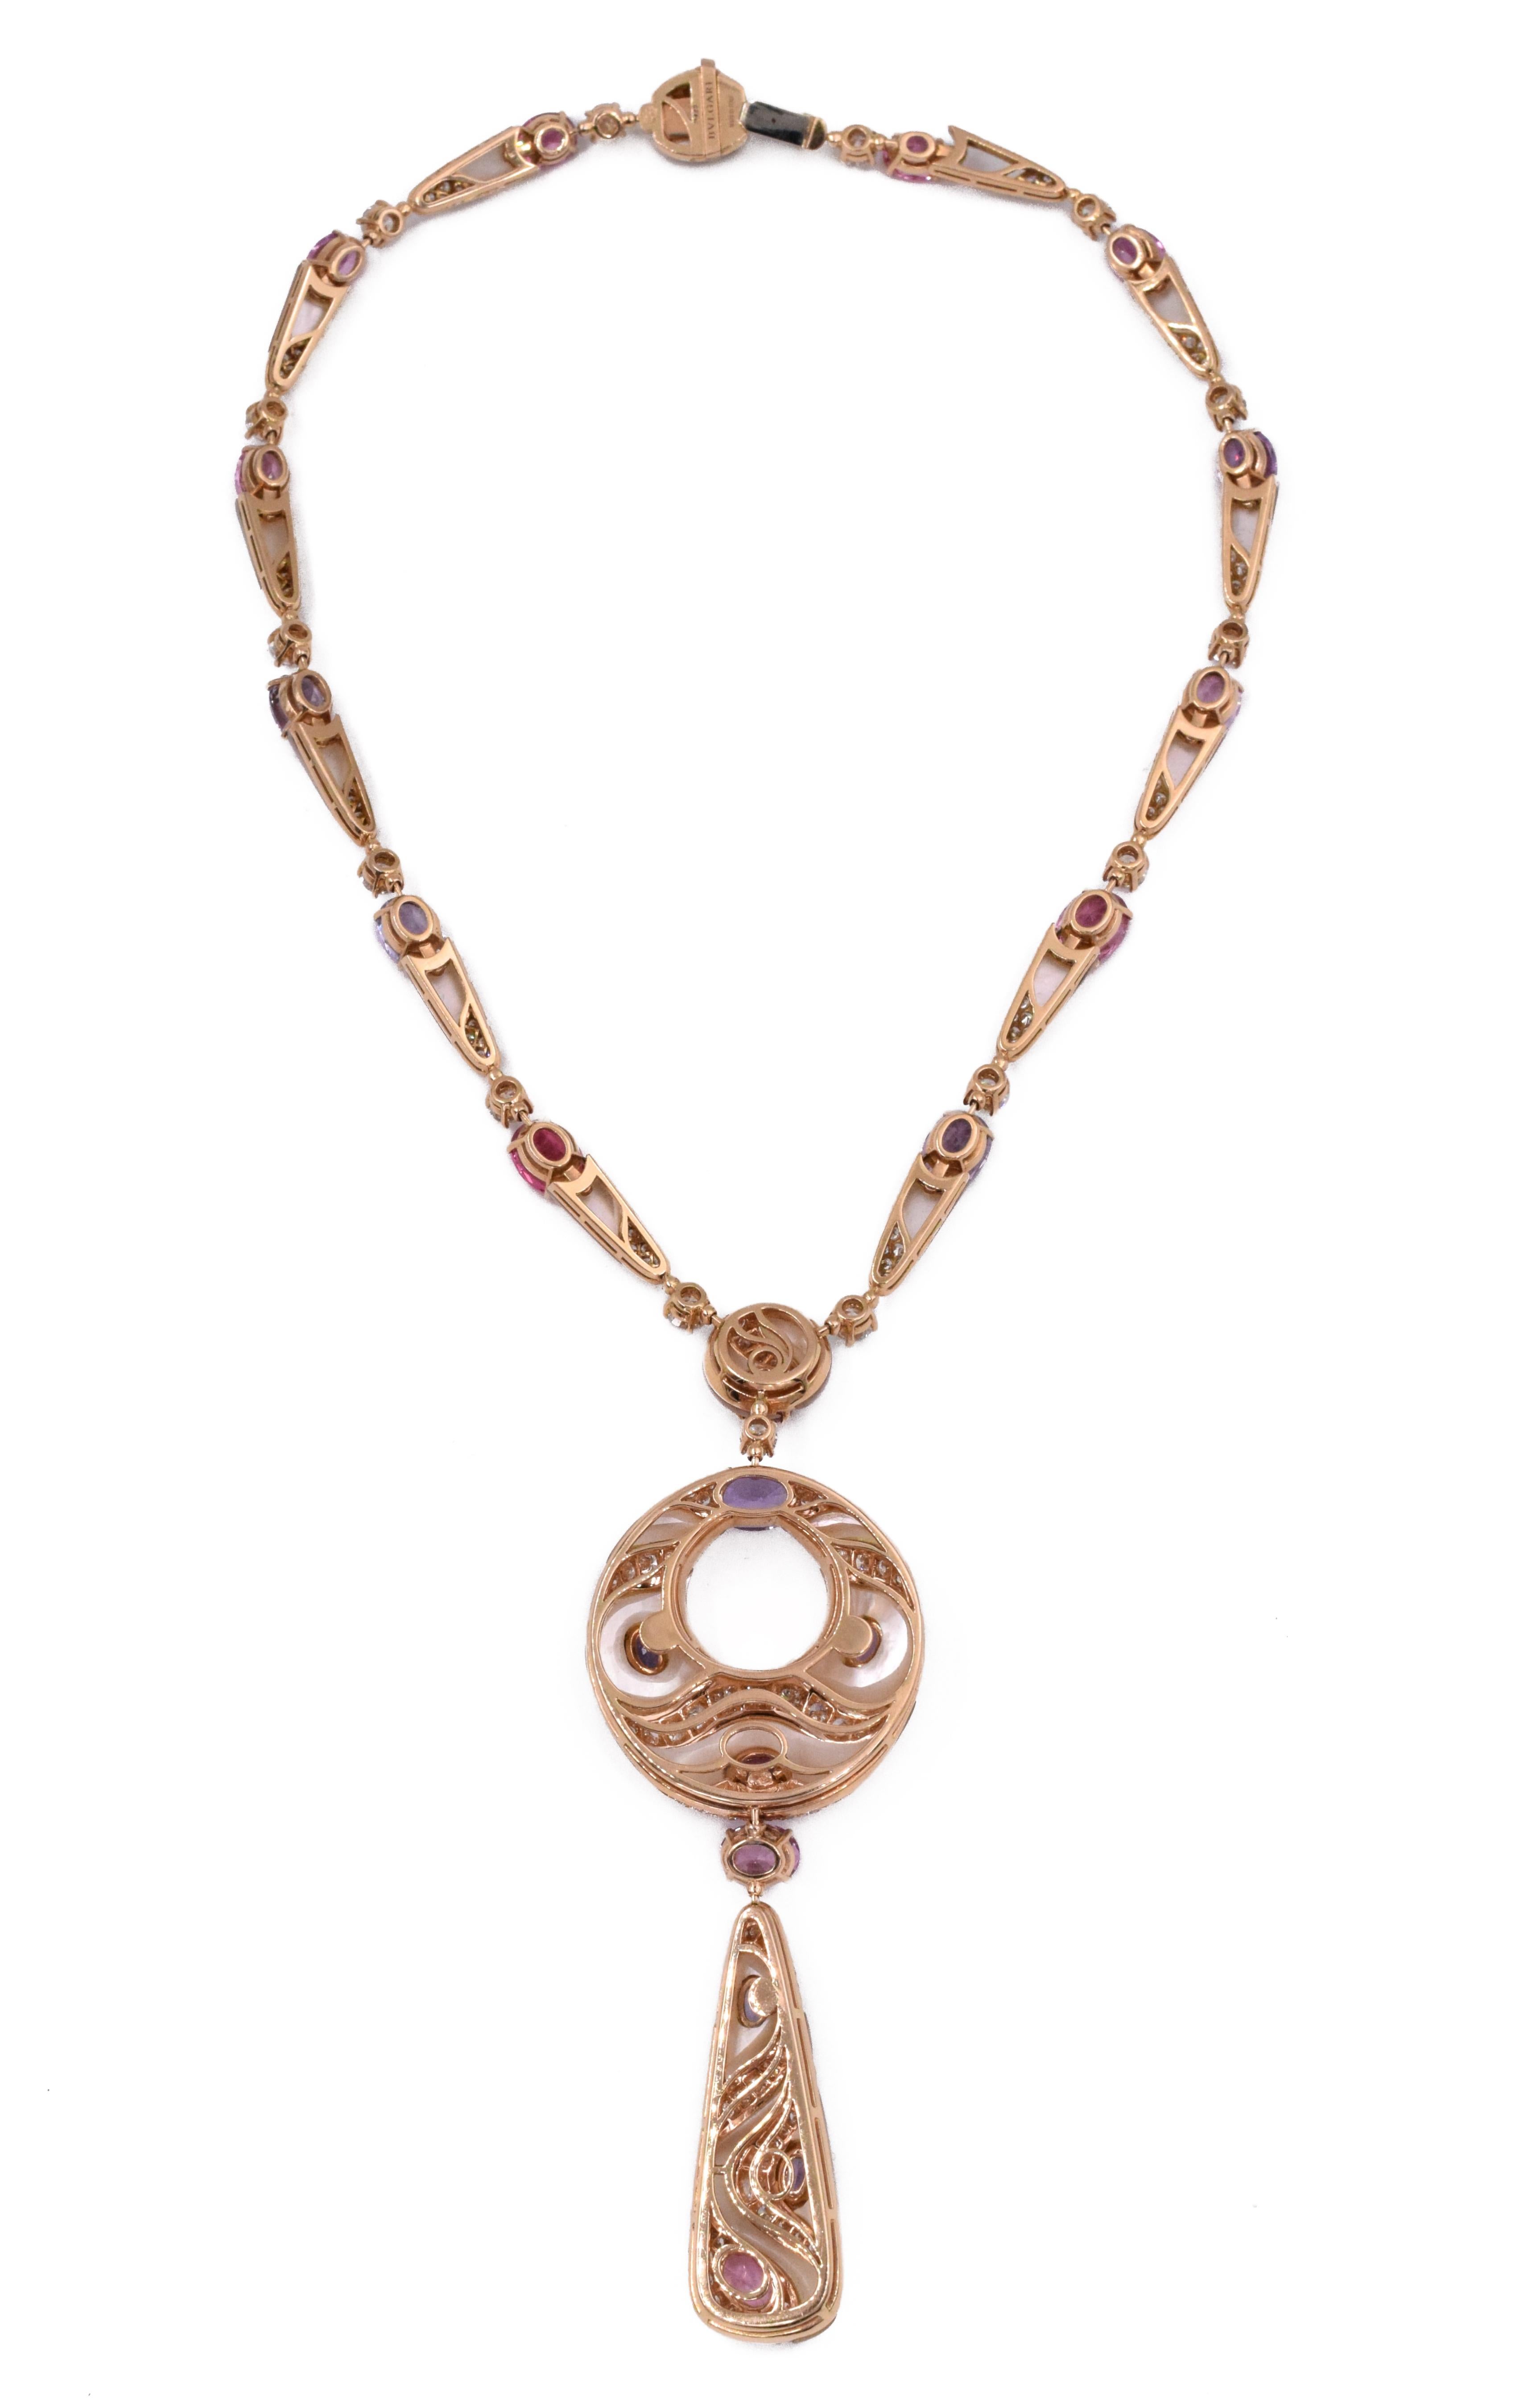 Artist Bulgari Mother of Pearl, Colored Spinel, and Diamond Necklace